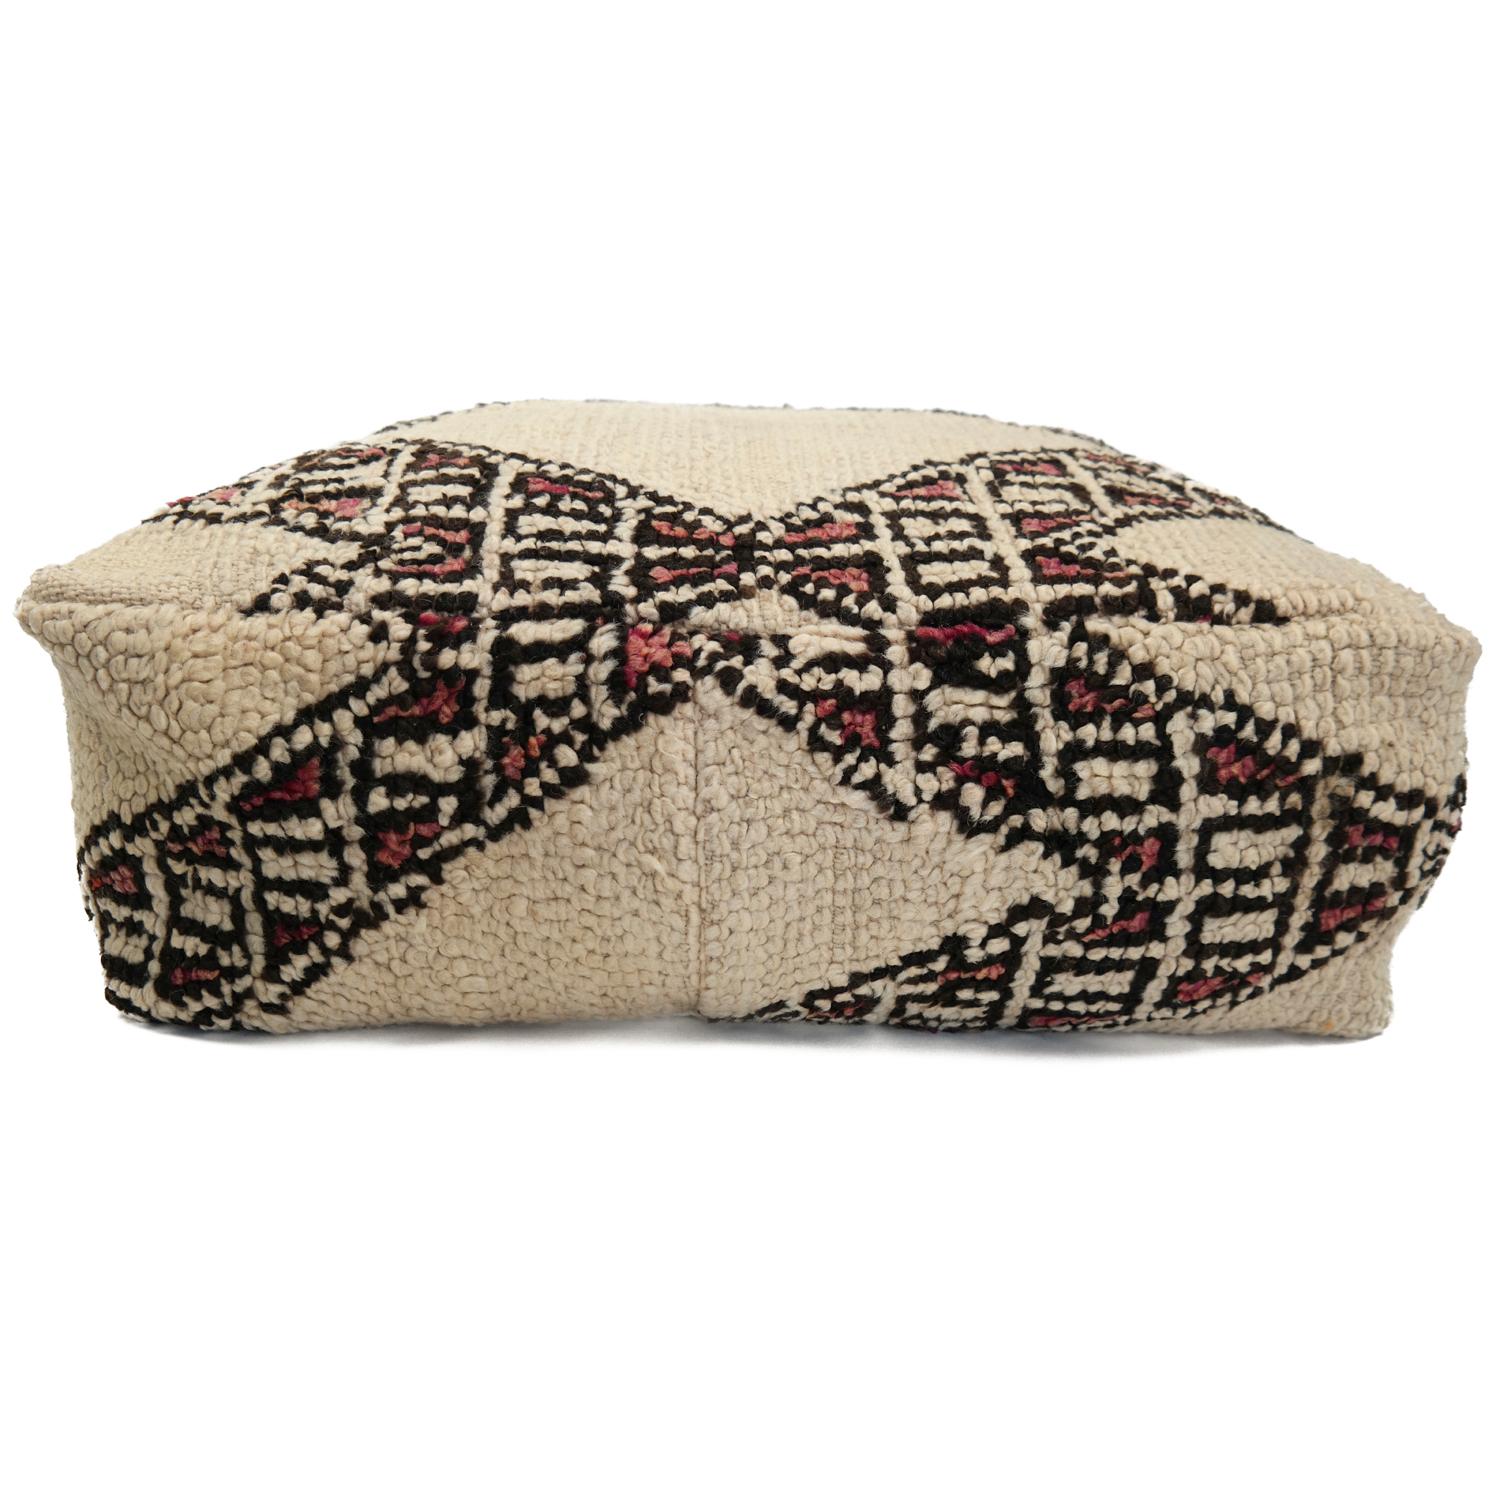 Pouf from Morocco Natural Floor Cushion Moroccan Ottoman In Good Condition For Sale In Zaandam, NL